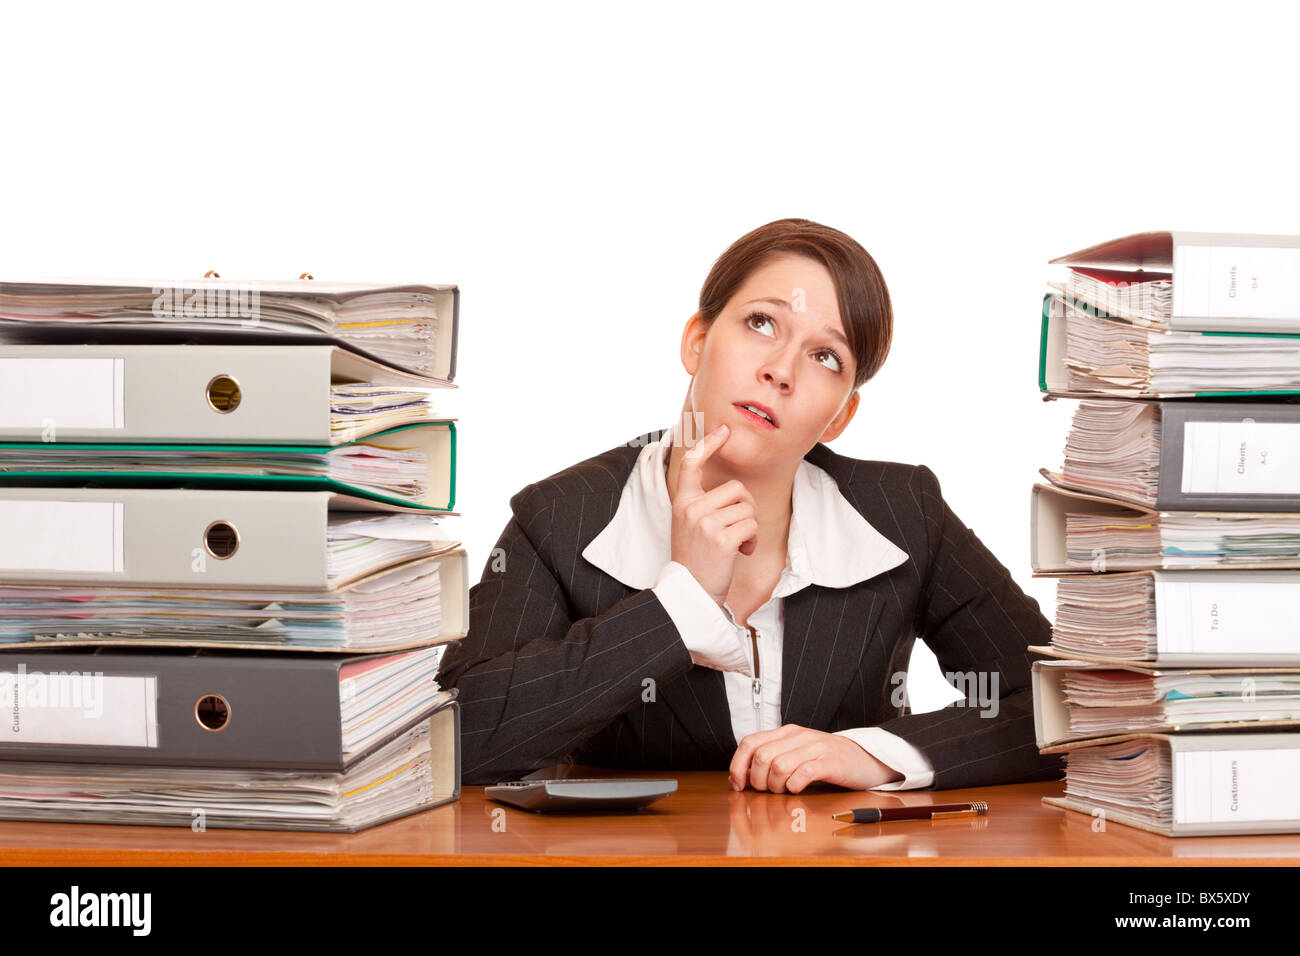 overworked contemplative business woman in office between folder stacks. Isolated on white background. Stock Photo